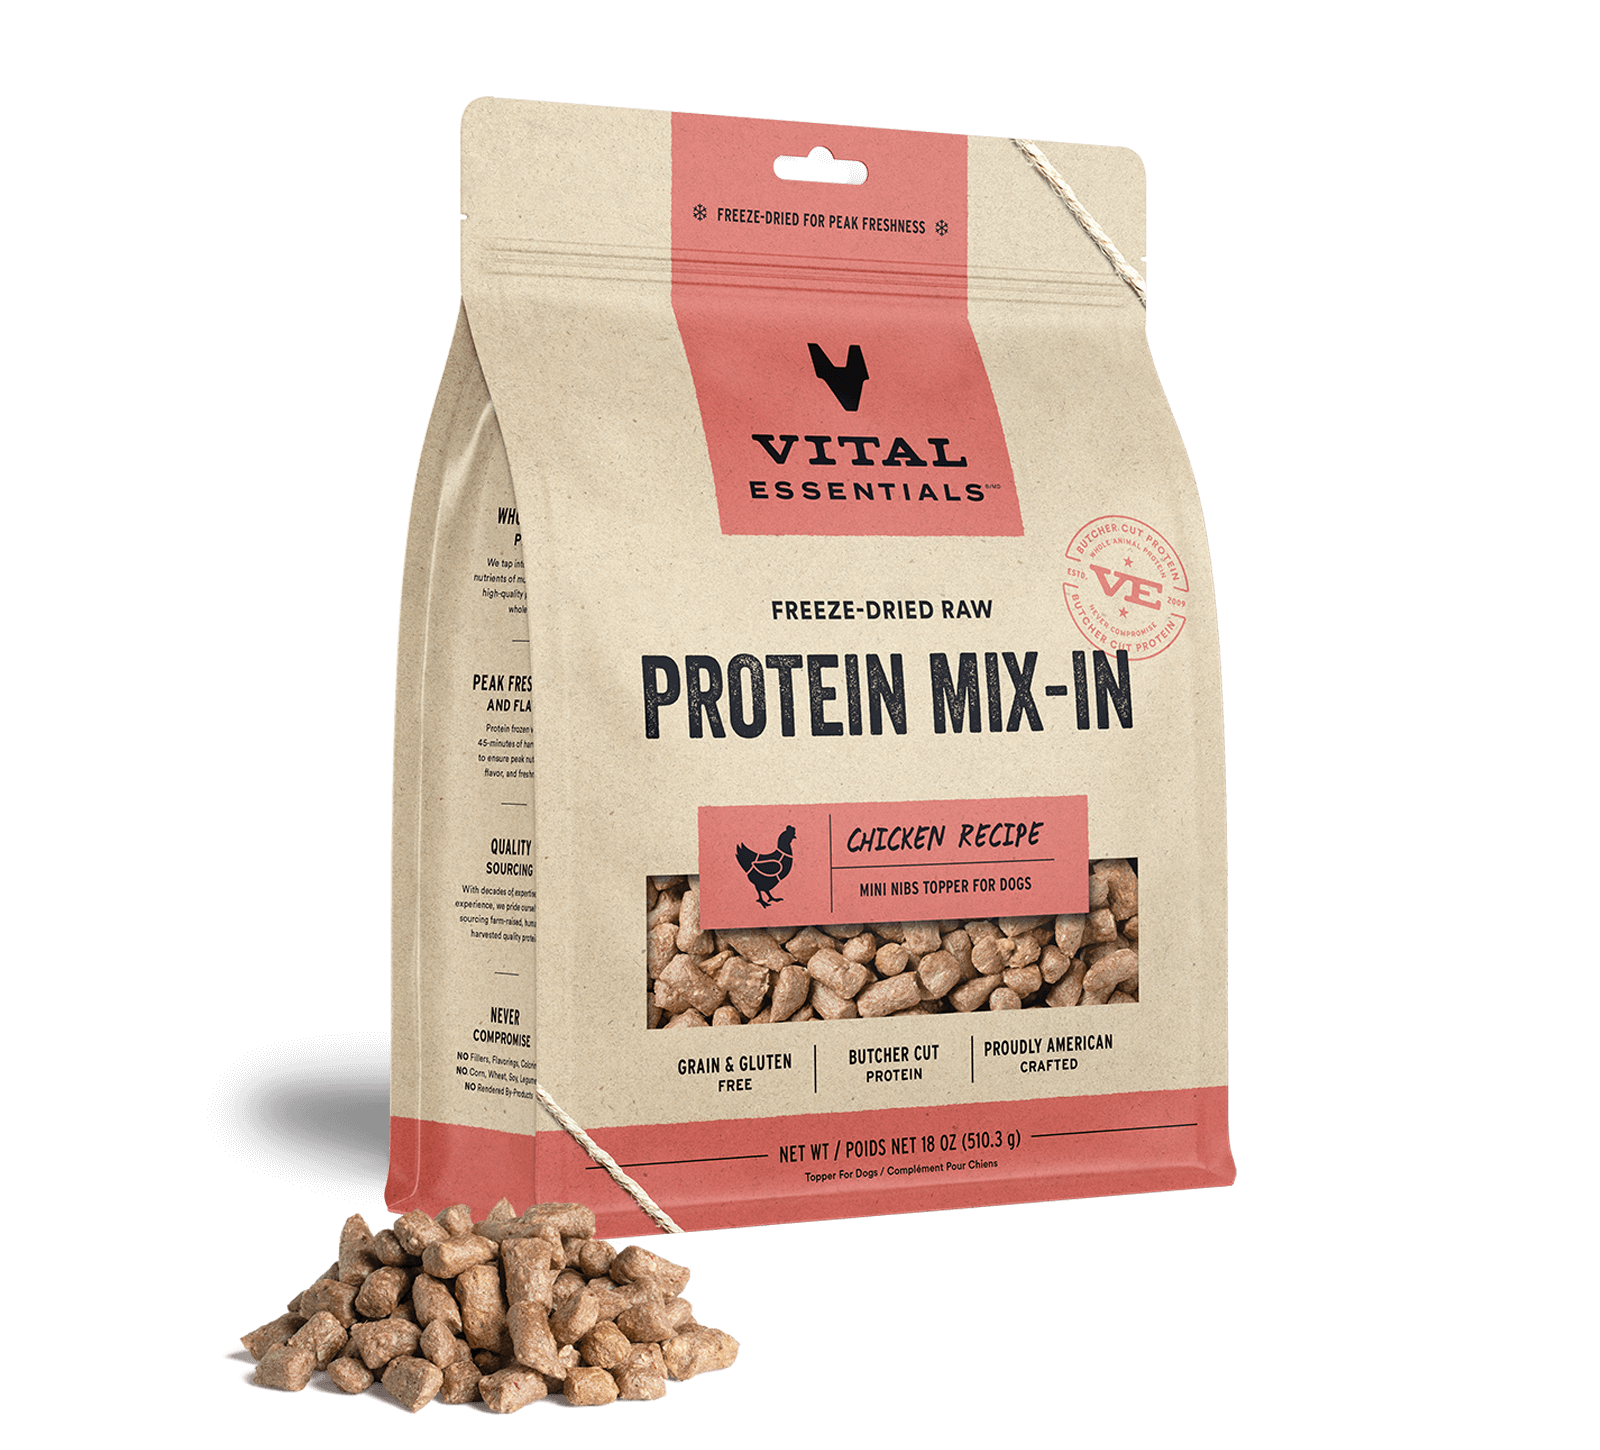 Vital Essentials Freeze-Dried Raw Protein Mix-In Chicken Recipe Mini Nibs Topper for Dogs, 18 oz - Healing/First Aid